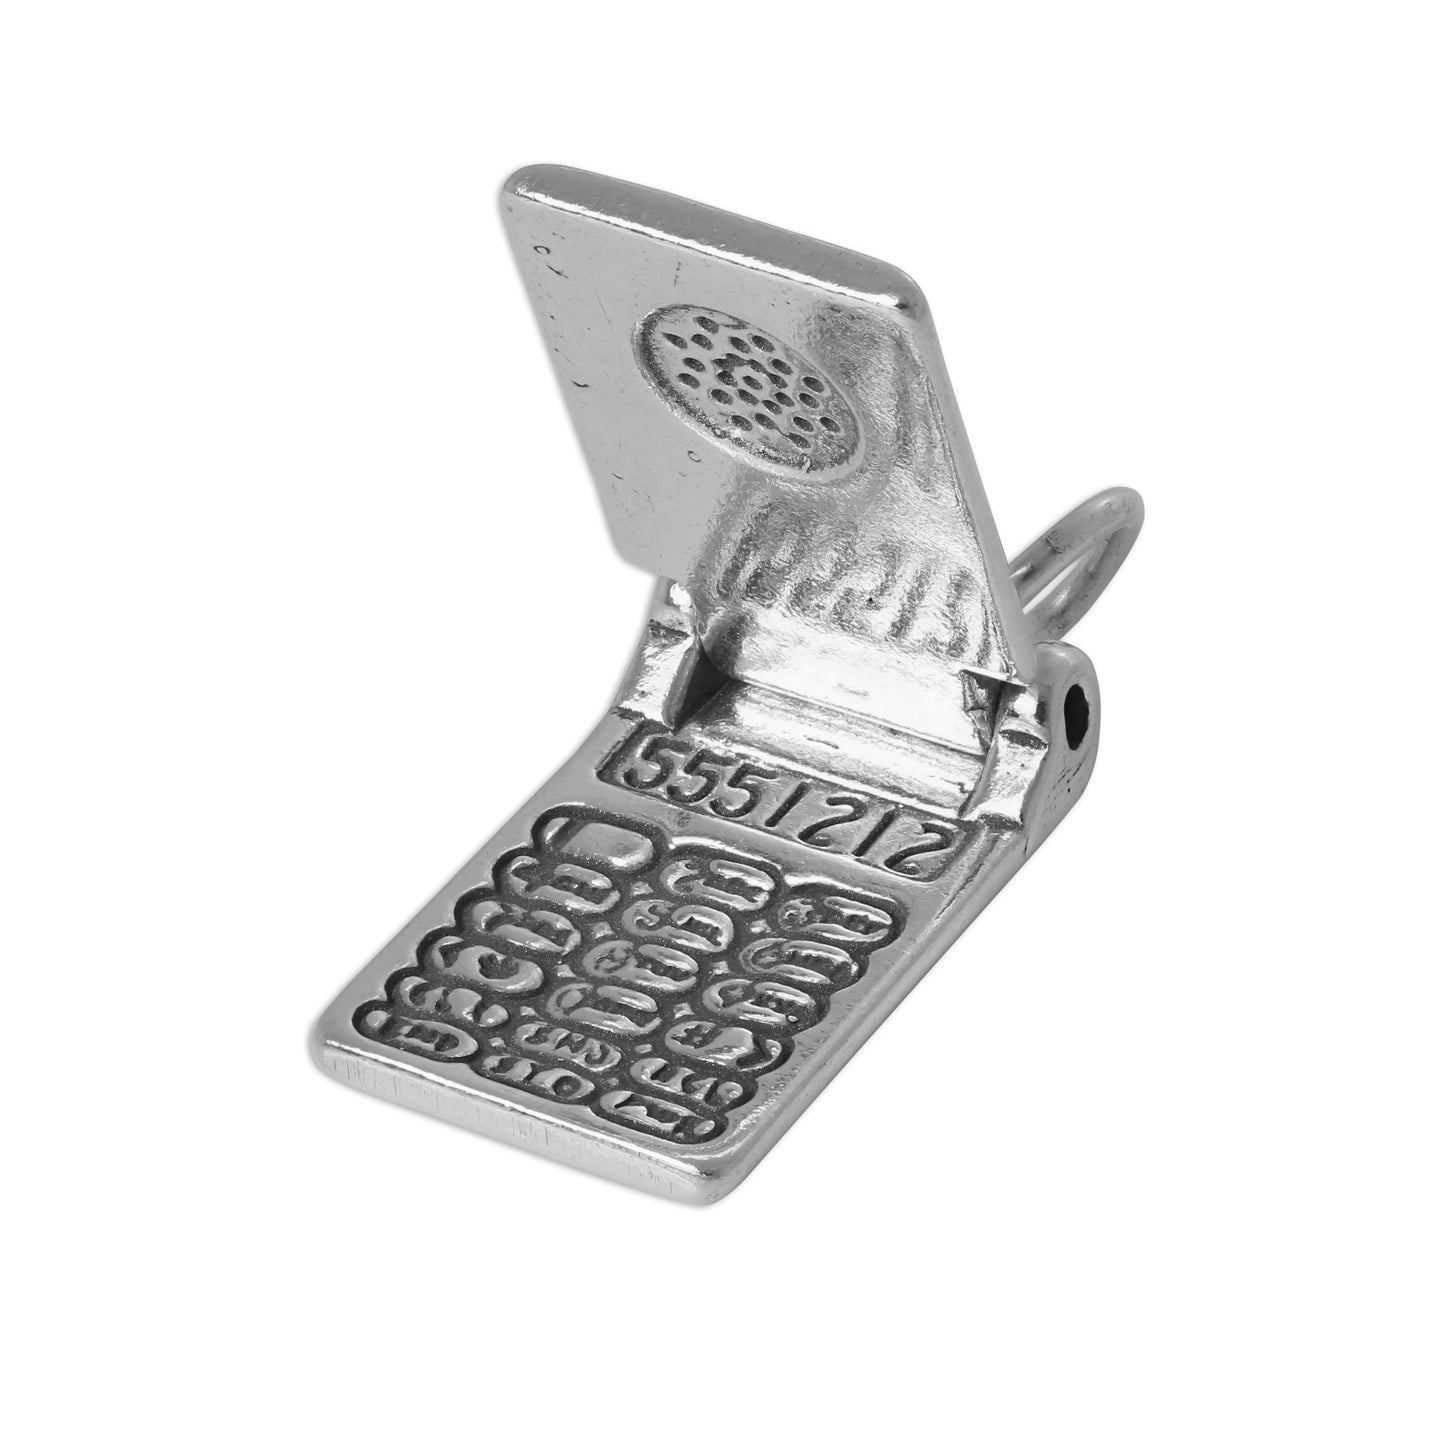 Sterling Silver 3D Mobile Phone Charm